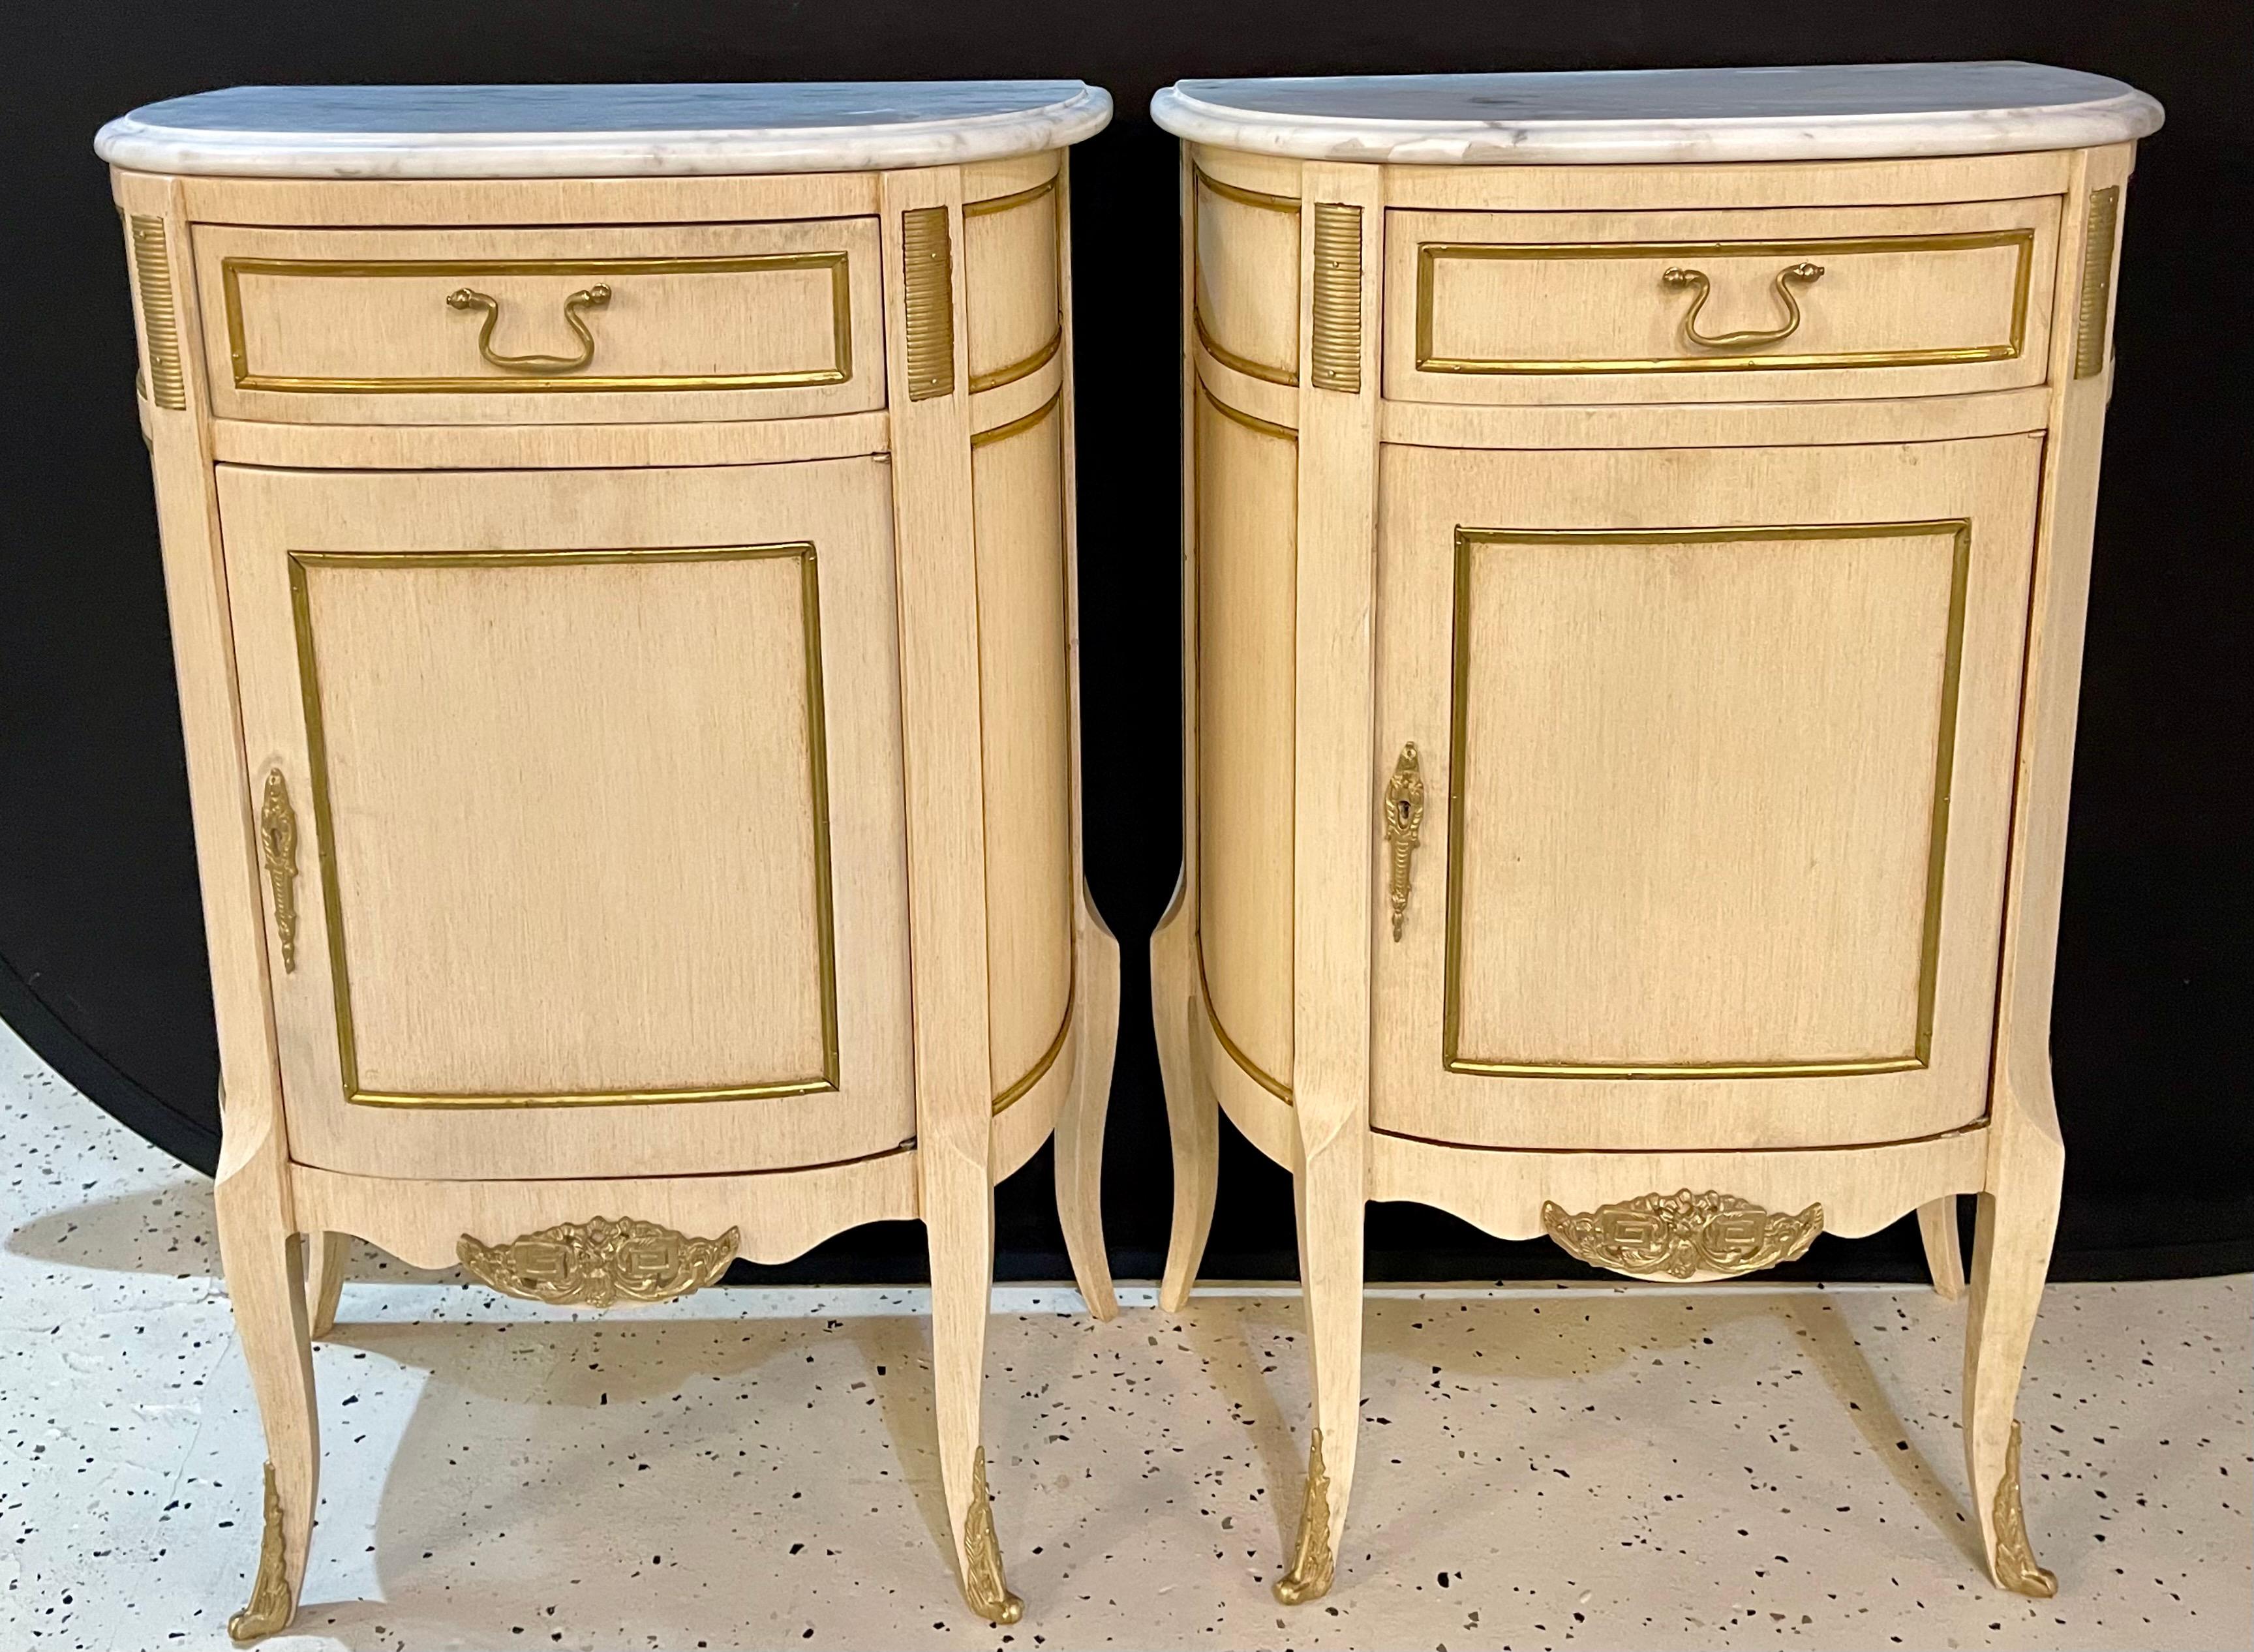 20th Century Hollywood Regency Painted End Tables, Nightstands or Pedestals, a Pair